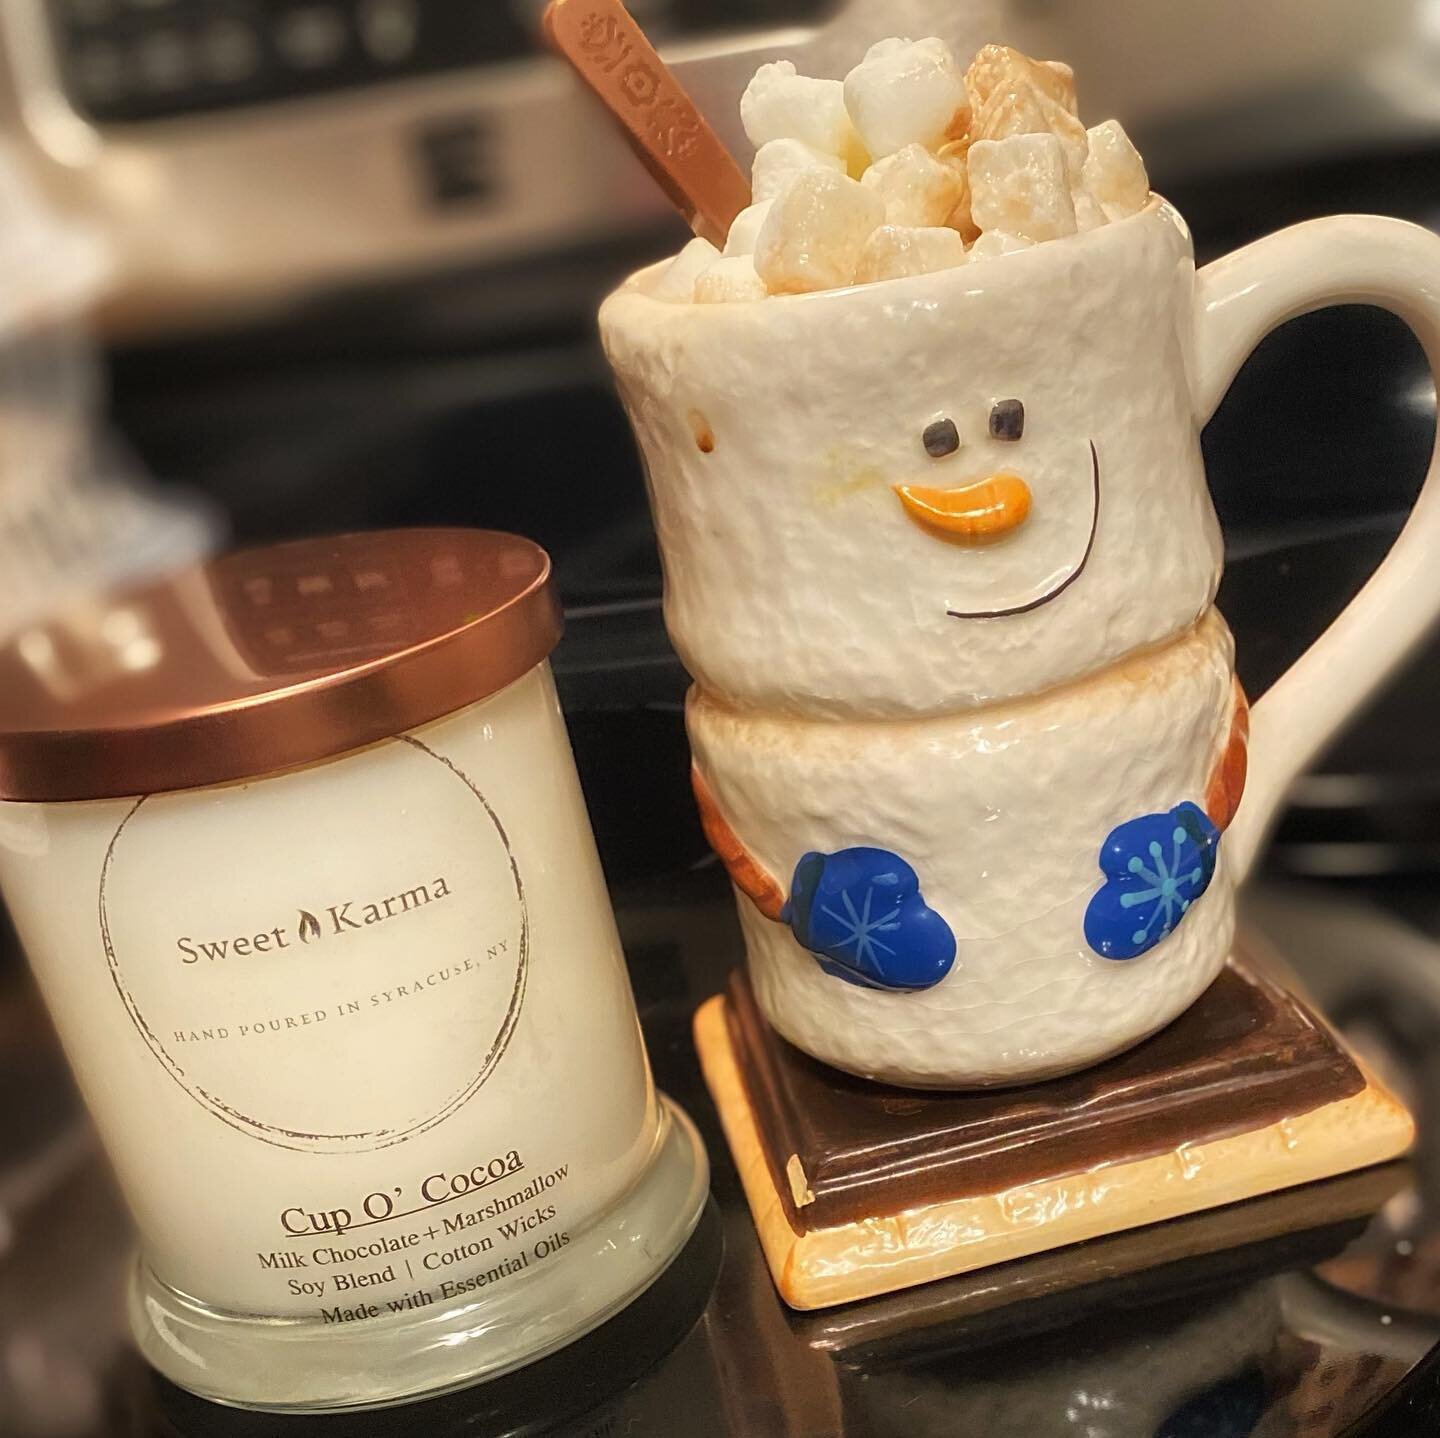 ⛄️🍫What better way to spend these snowy🍫⛄️days than with a Hot Cup O&rsquo; Cocoa... ❄️New scent now in stock❄️ #snowday #snowman #hotchocolate #homemade #handpouredcandles #chocolate #womanownedbusiness #blackownedbusiness #syracuse #blackownedcny